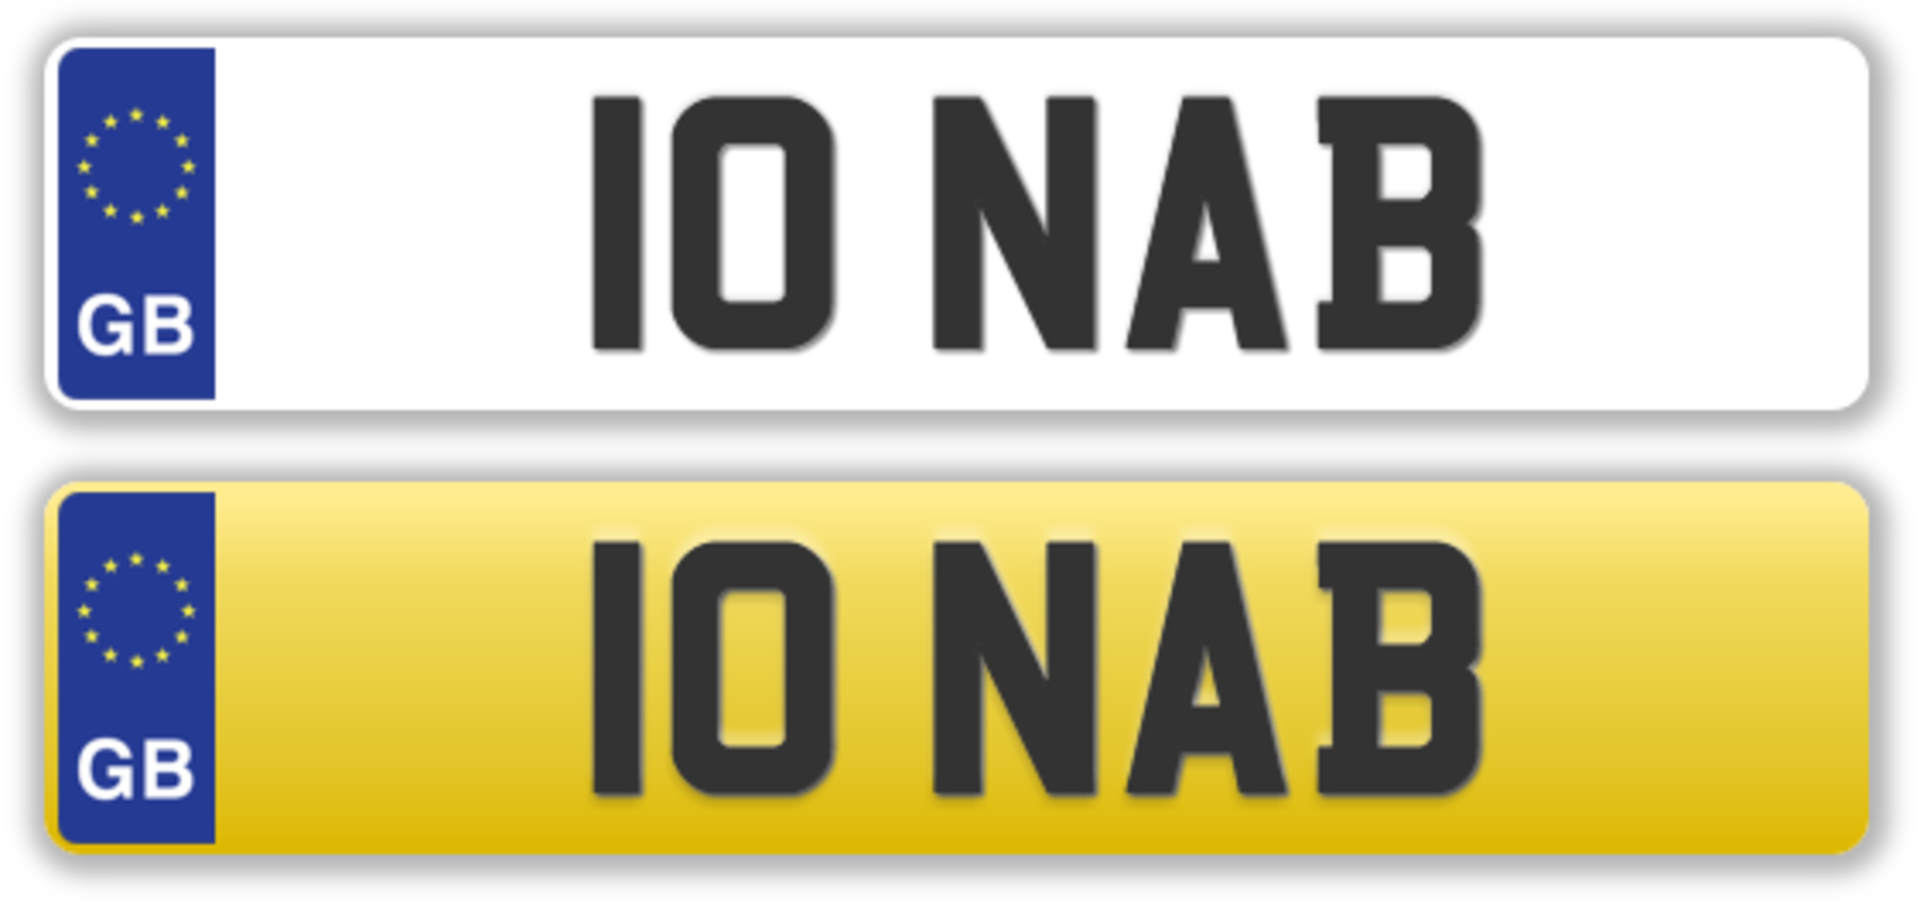 Cherished Plate - 10 NAB - No transfer fees. All registrations on retention and ready to transfer.